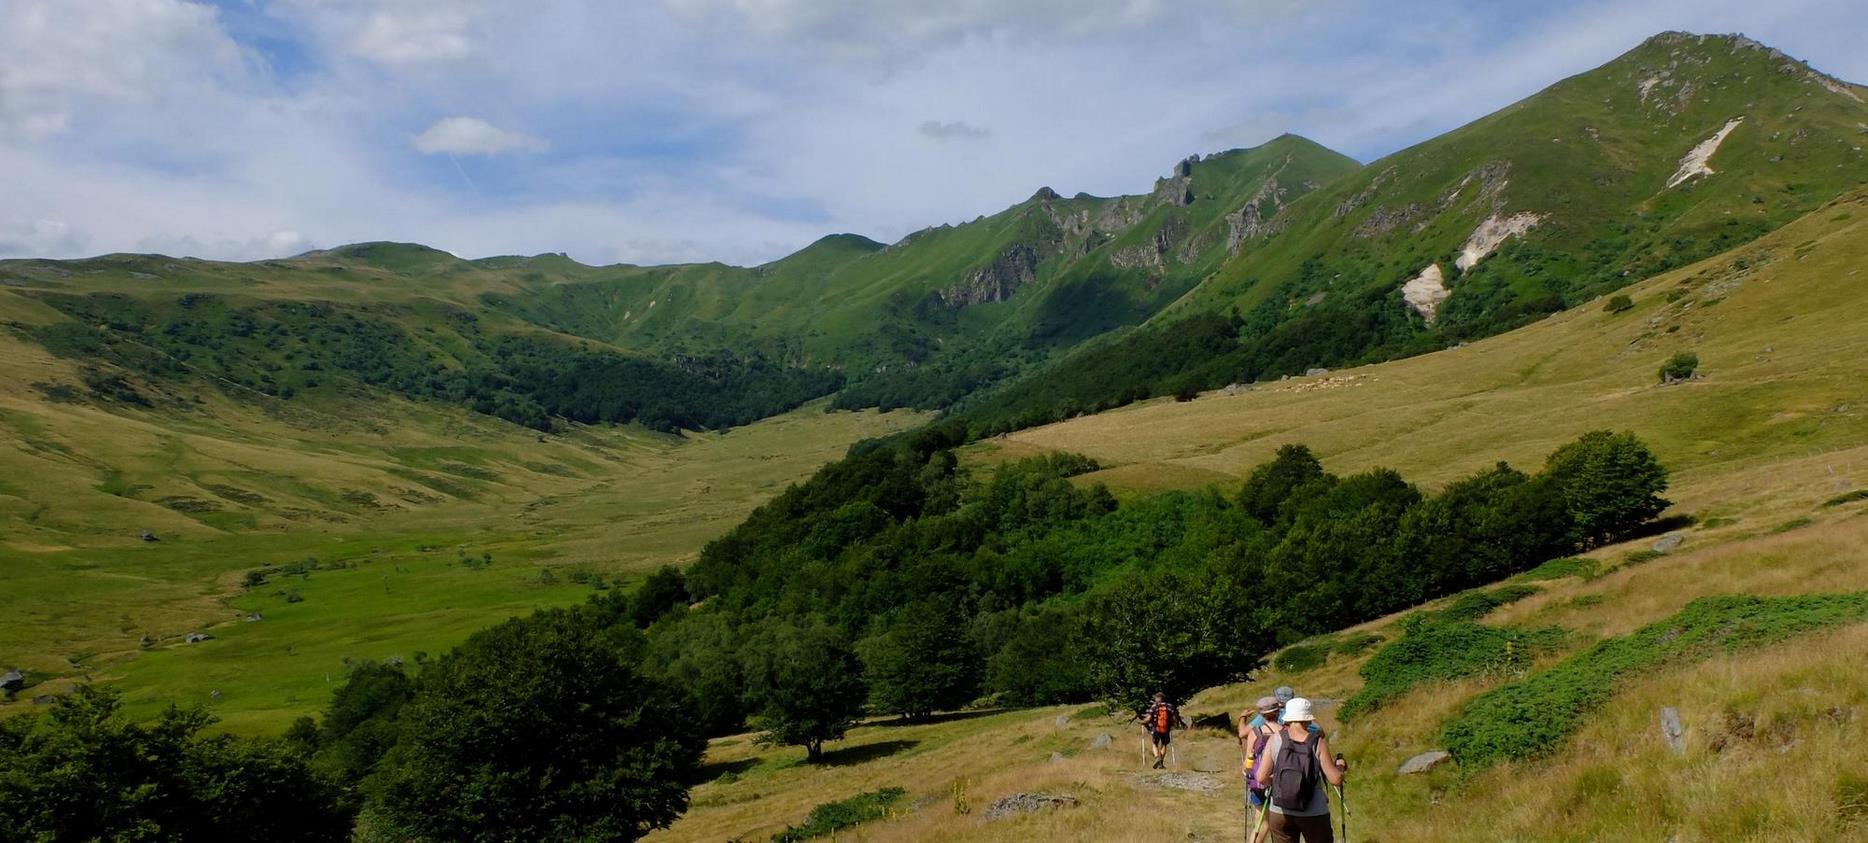 Super Besse - in the heart of the Sancy massif